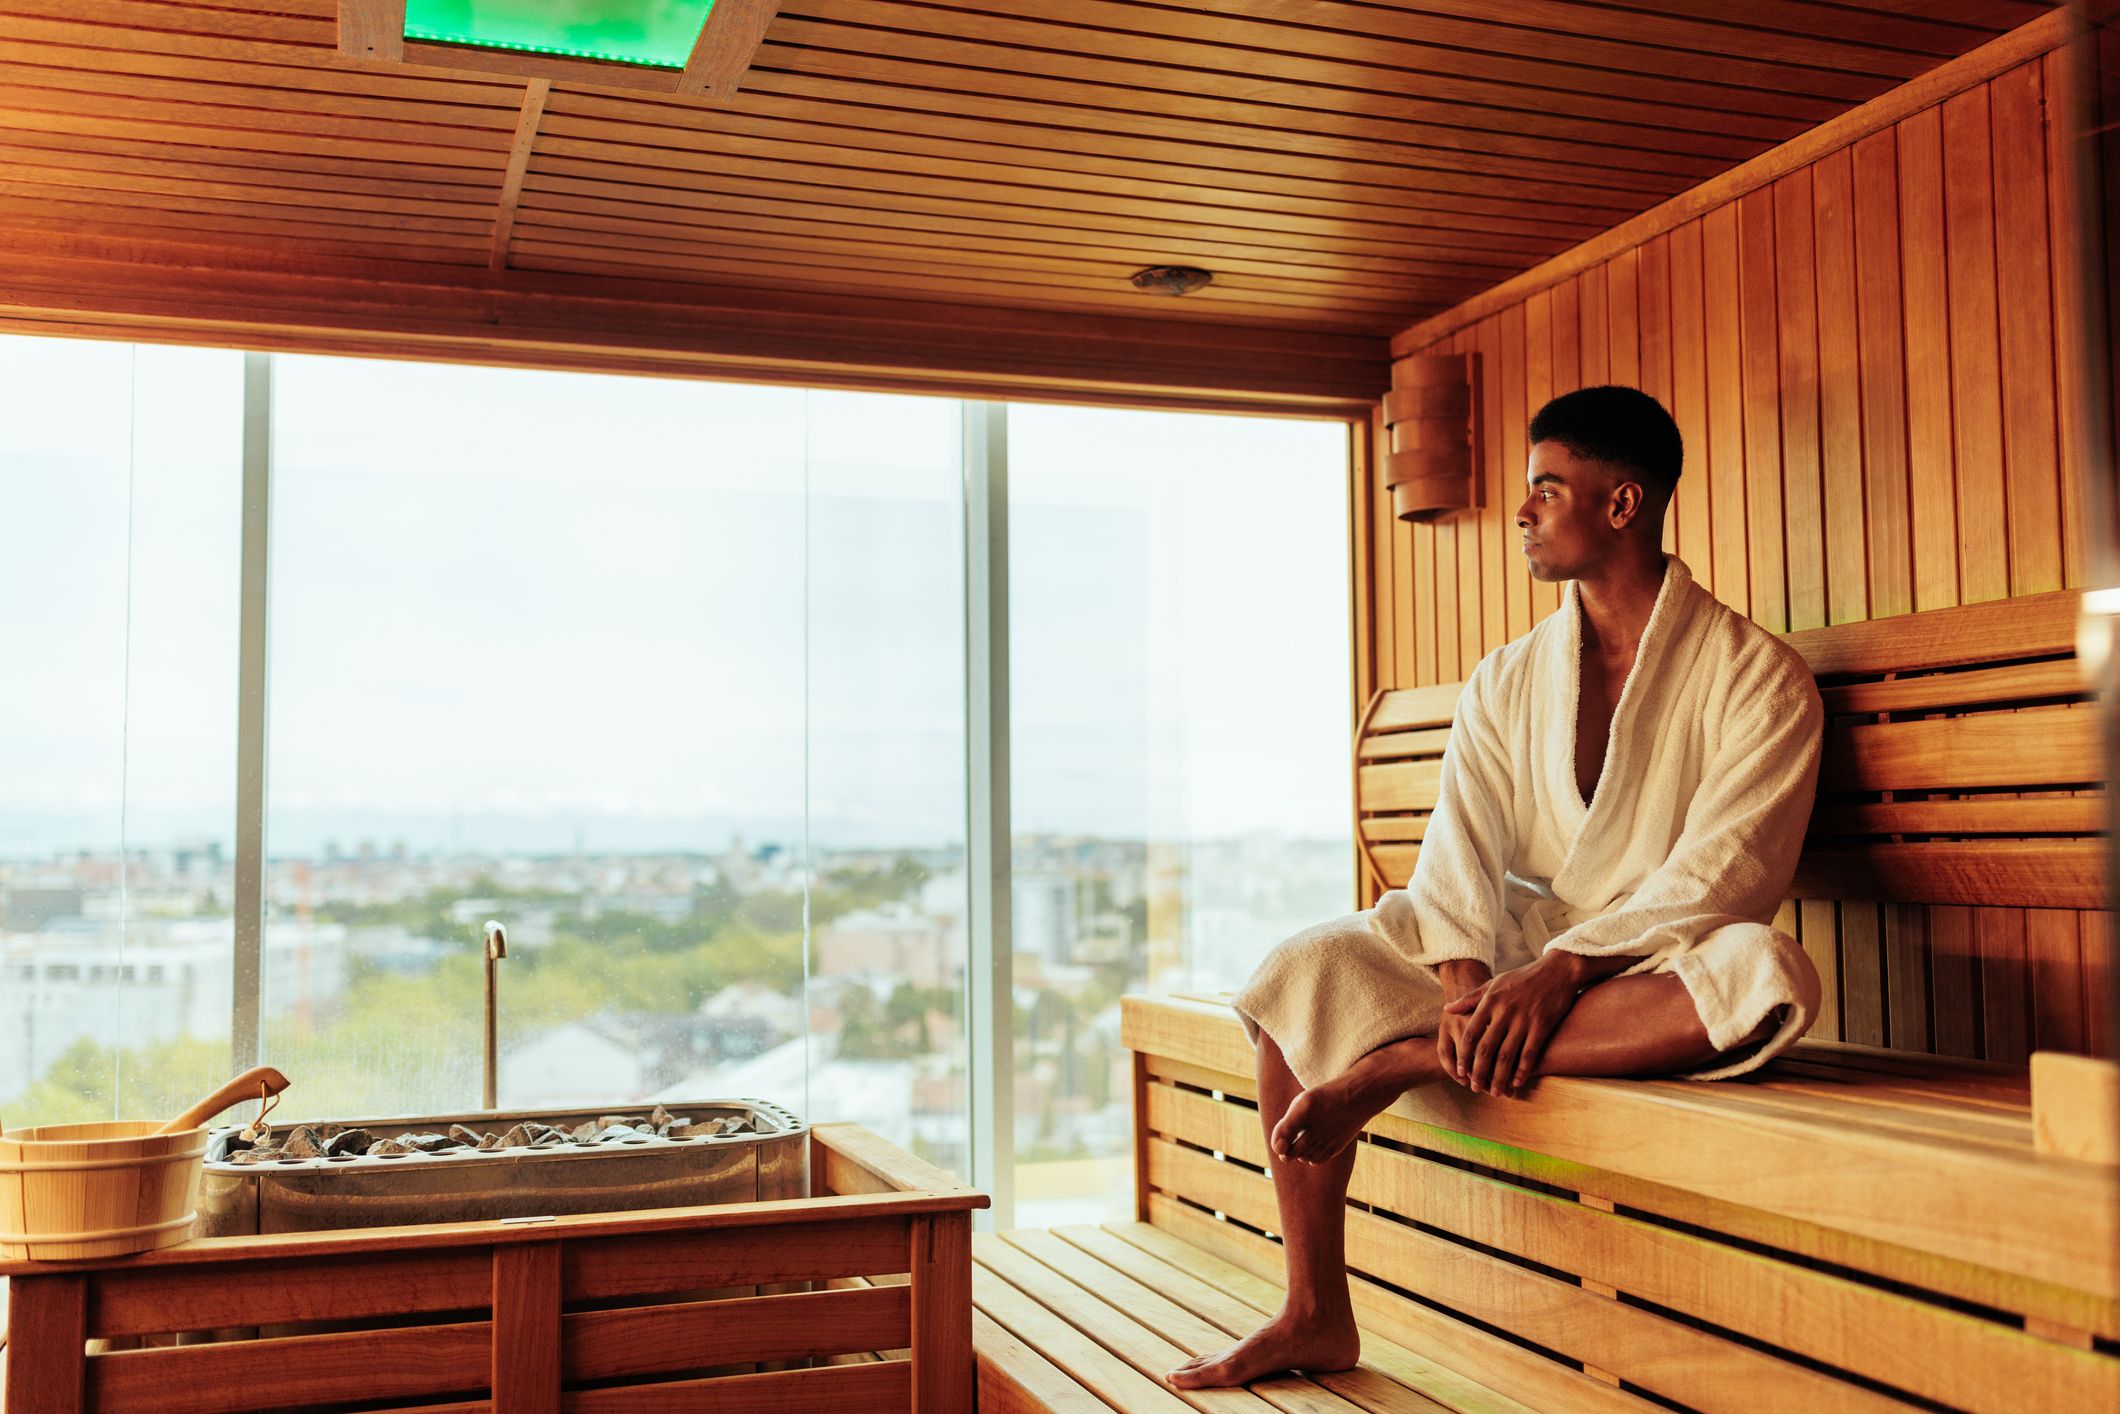 What Happens If You Stay In A Sauna Too Long Health Risks And Precautions